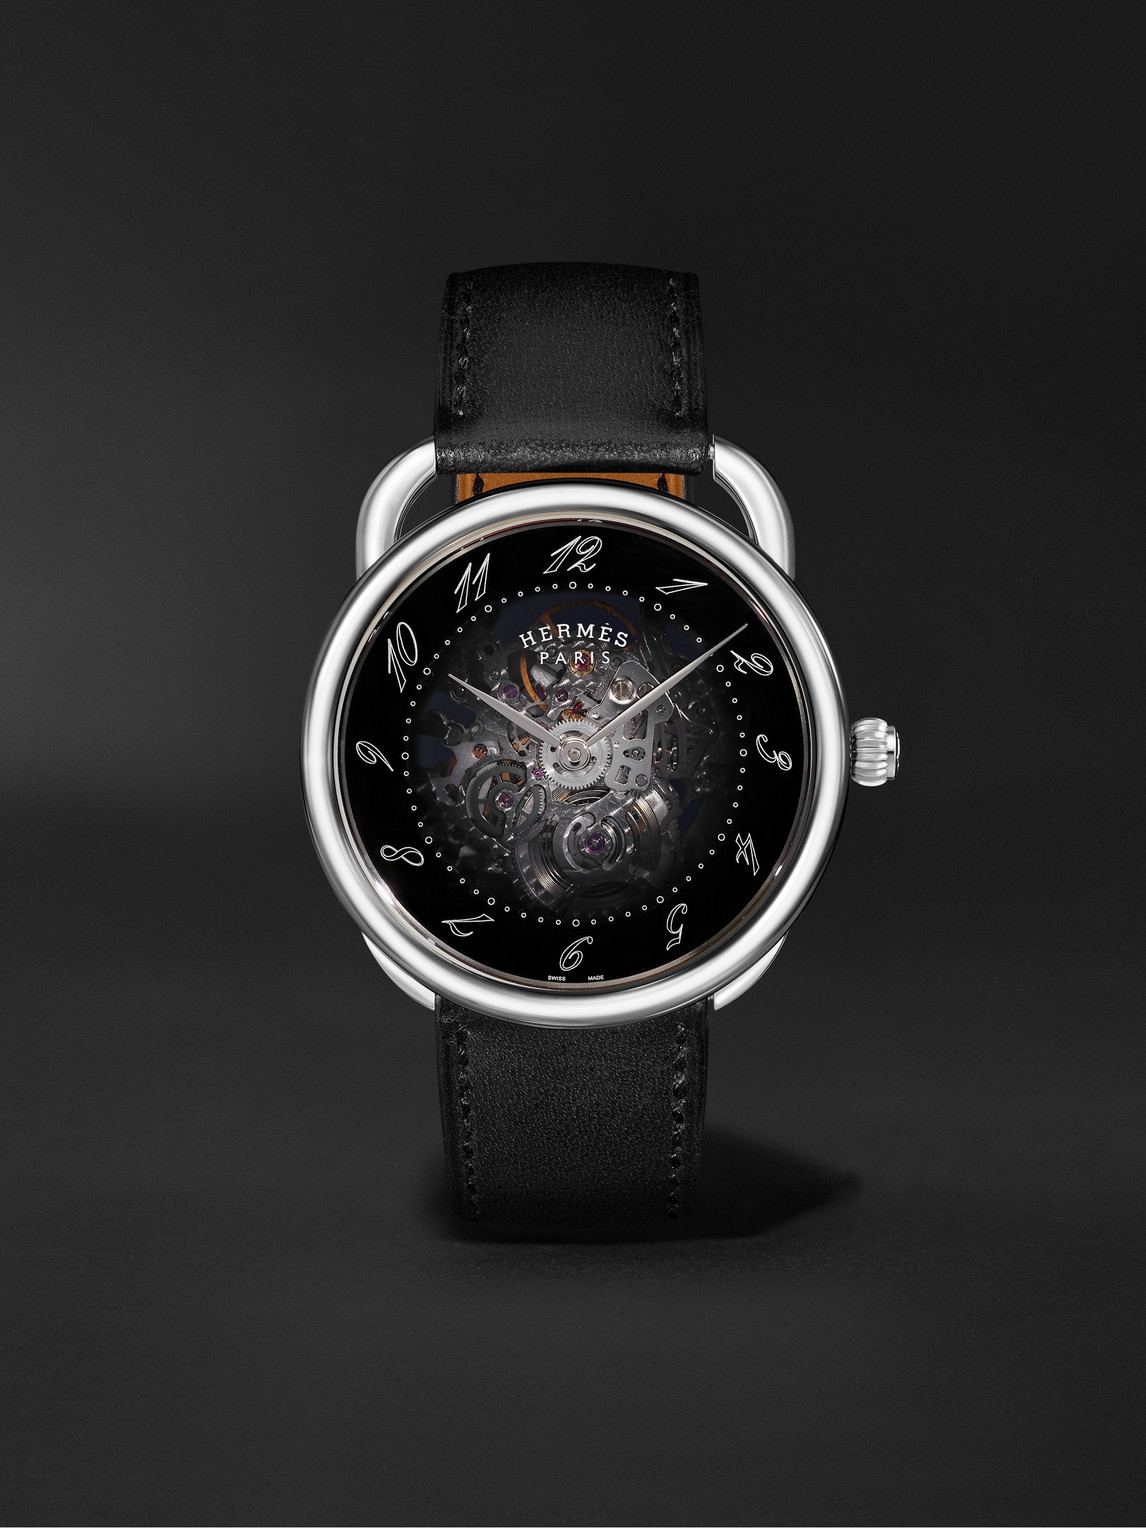 Hermès Timepieces Arceau Squelette Automatic 40mm Stainless Steel And Leather Watch, Ref. No. W055631ww00 In Black